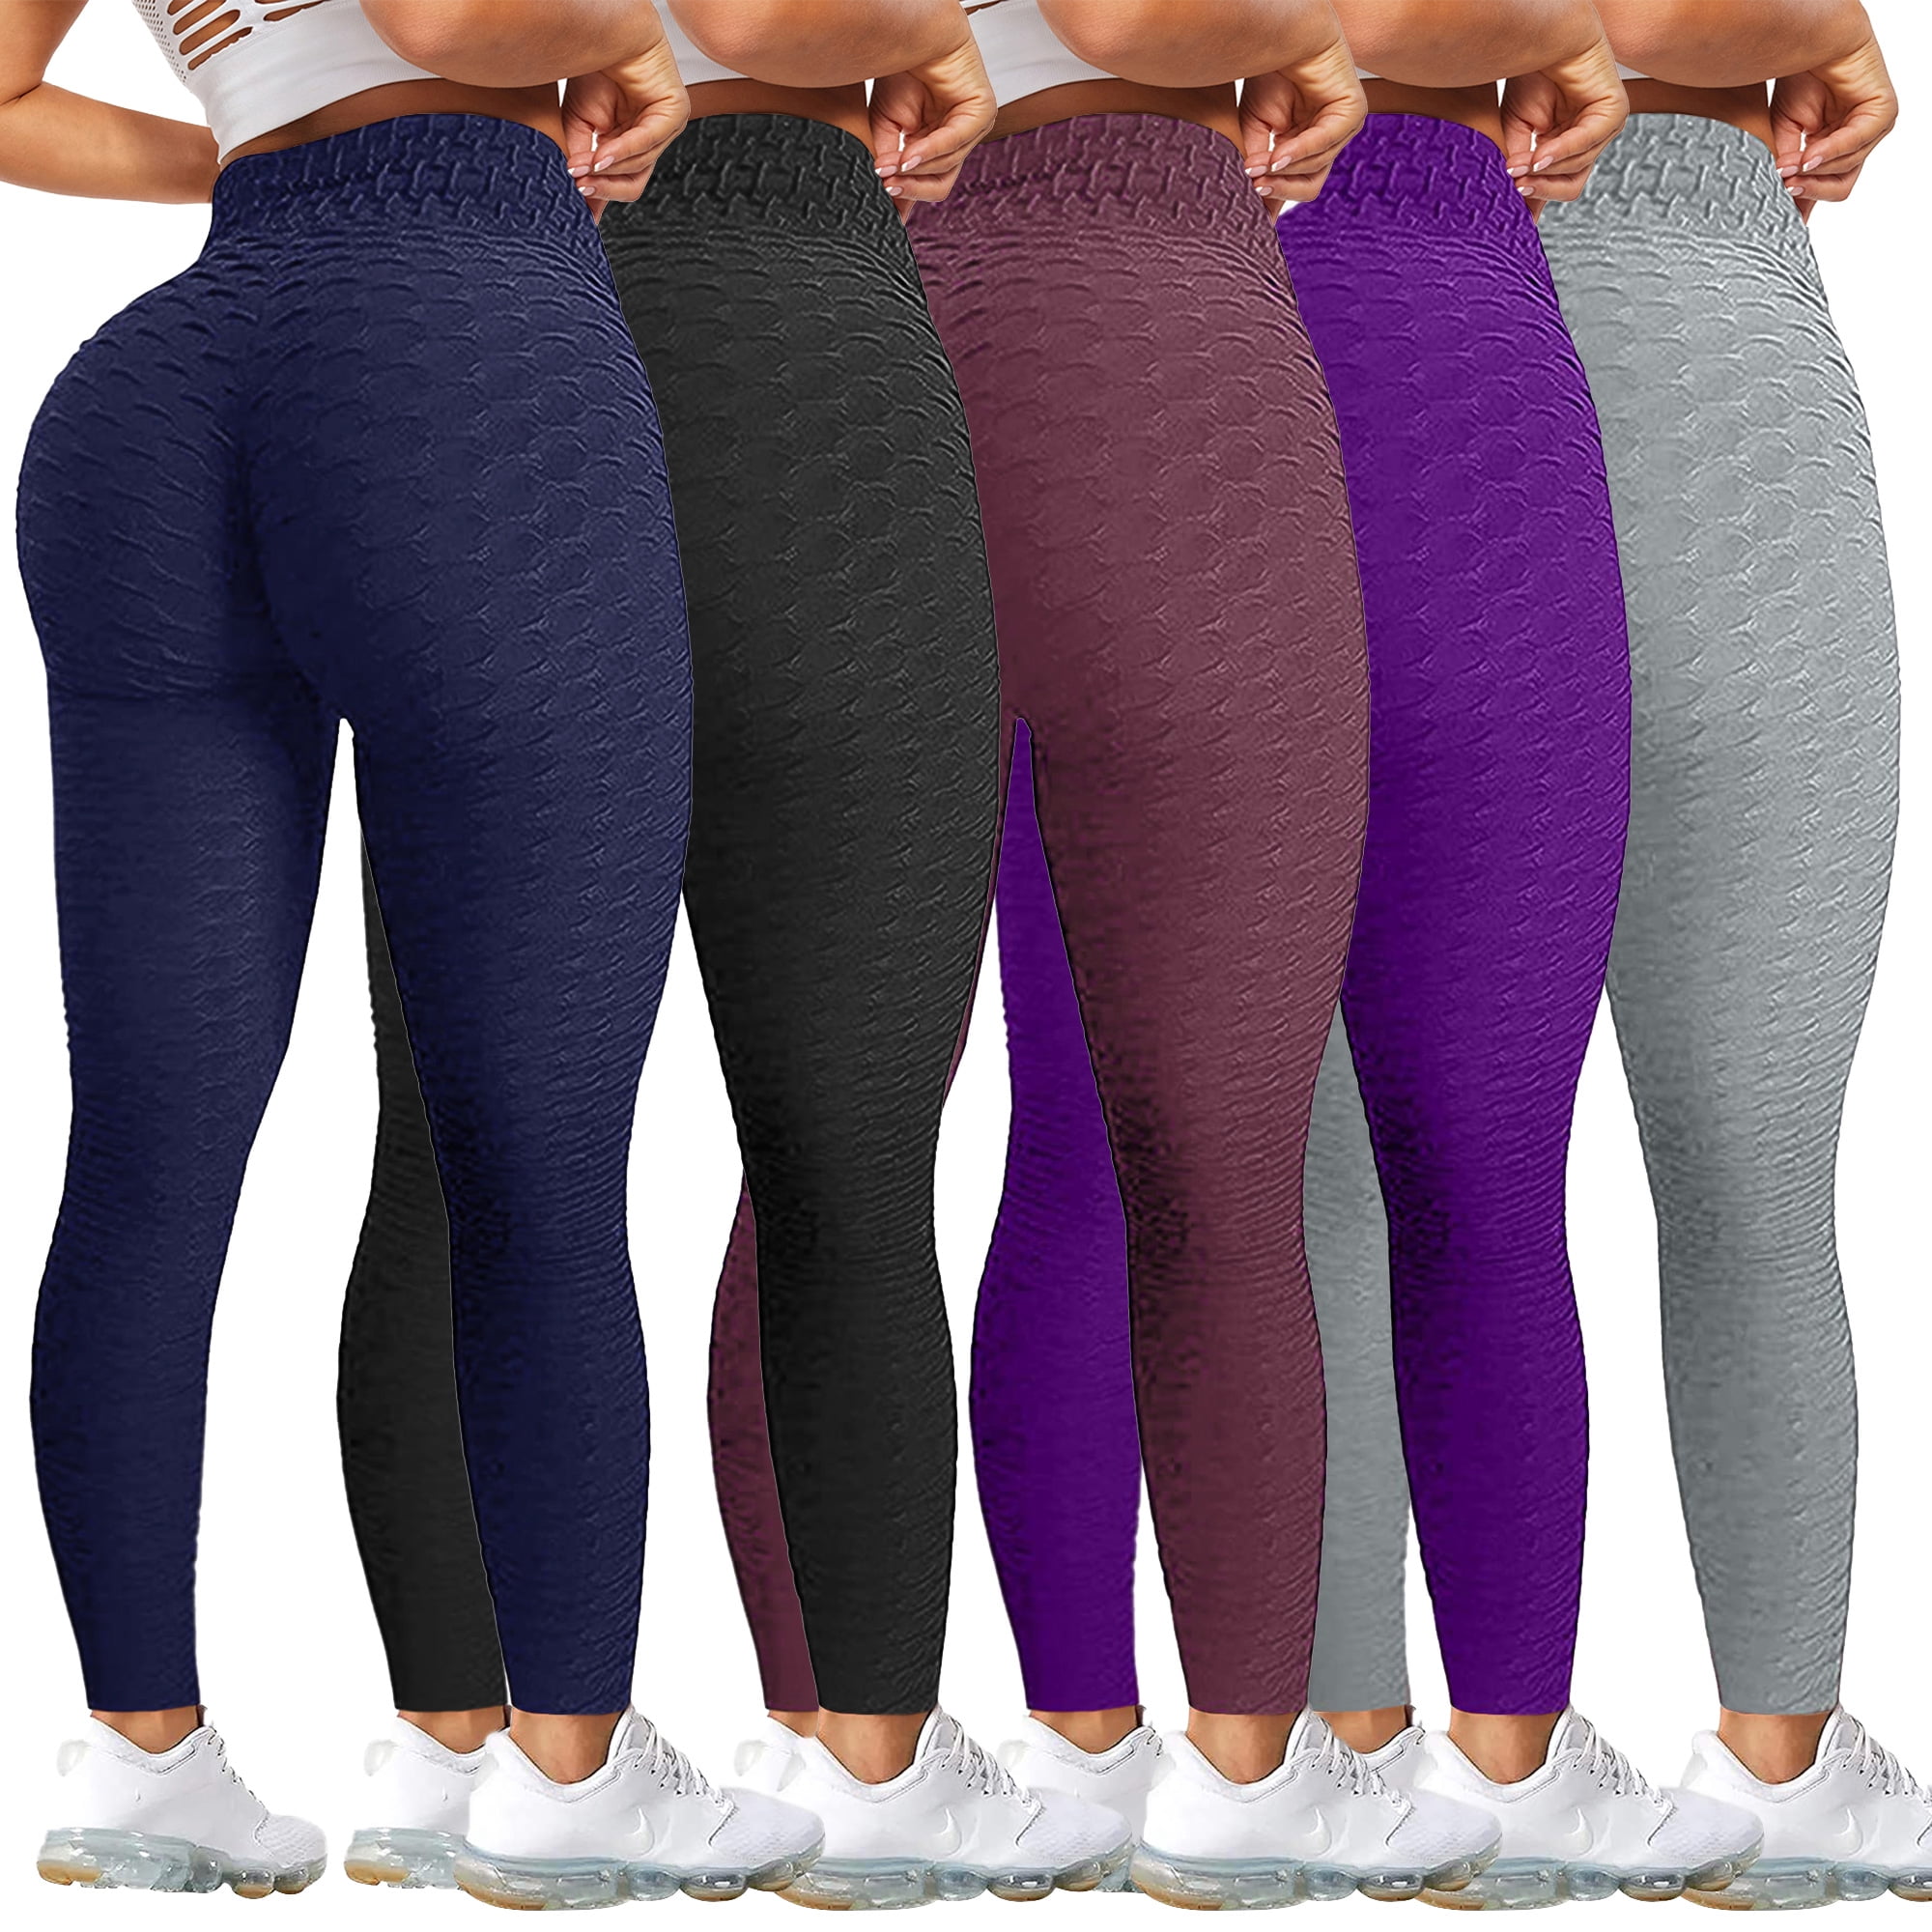 FITOP Butt Lifting Seamless Leggings for Women Workout Tights